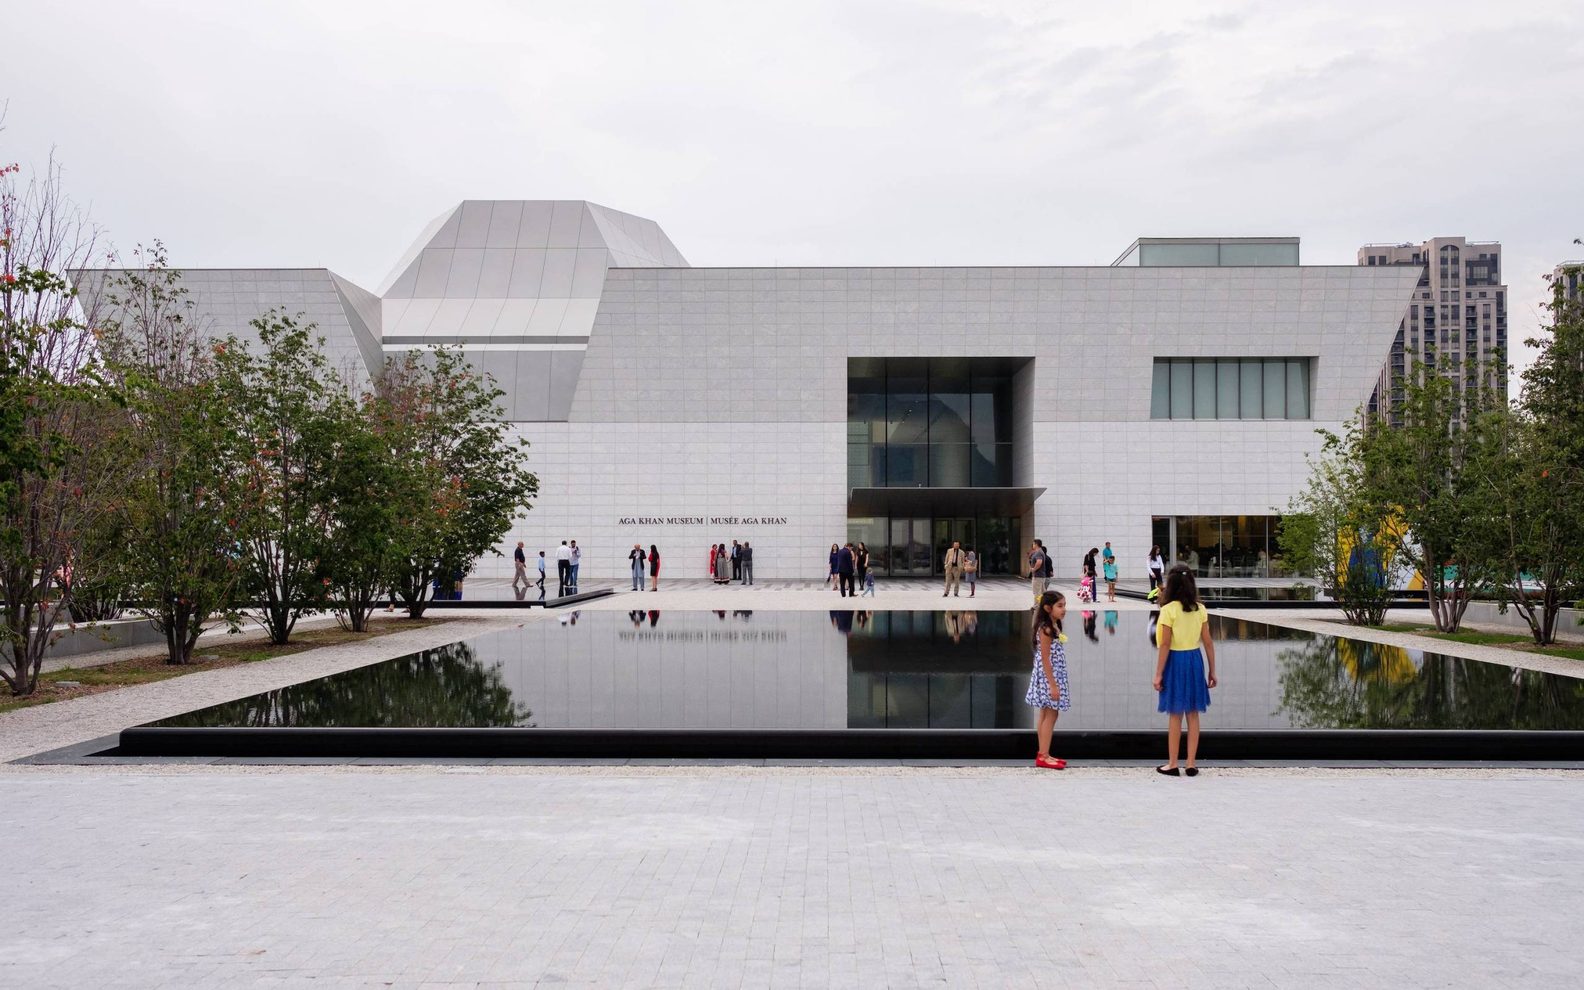 Wide exterior view of the Aga Khan Museum main entrance from over a reflecting pool on a cloudy day with children and many people gathered in front